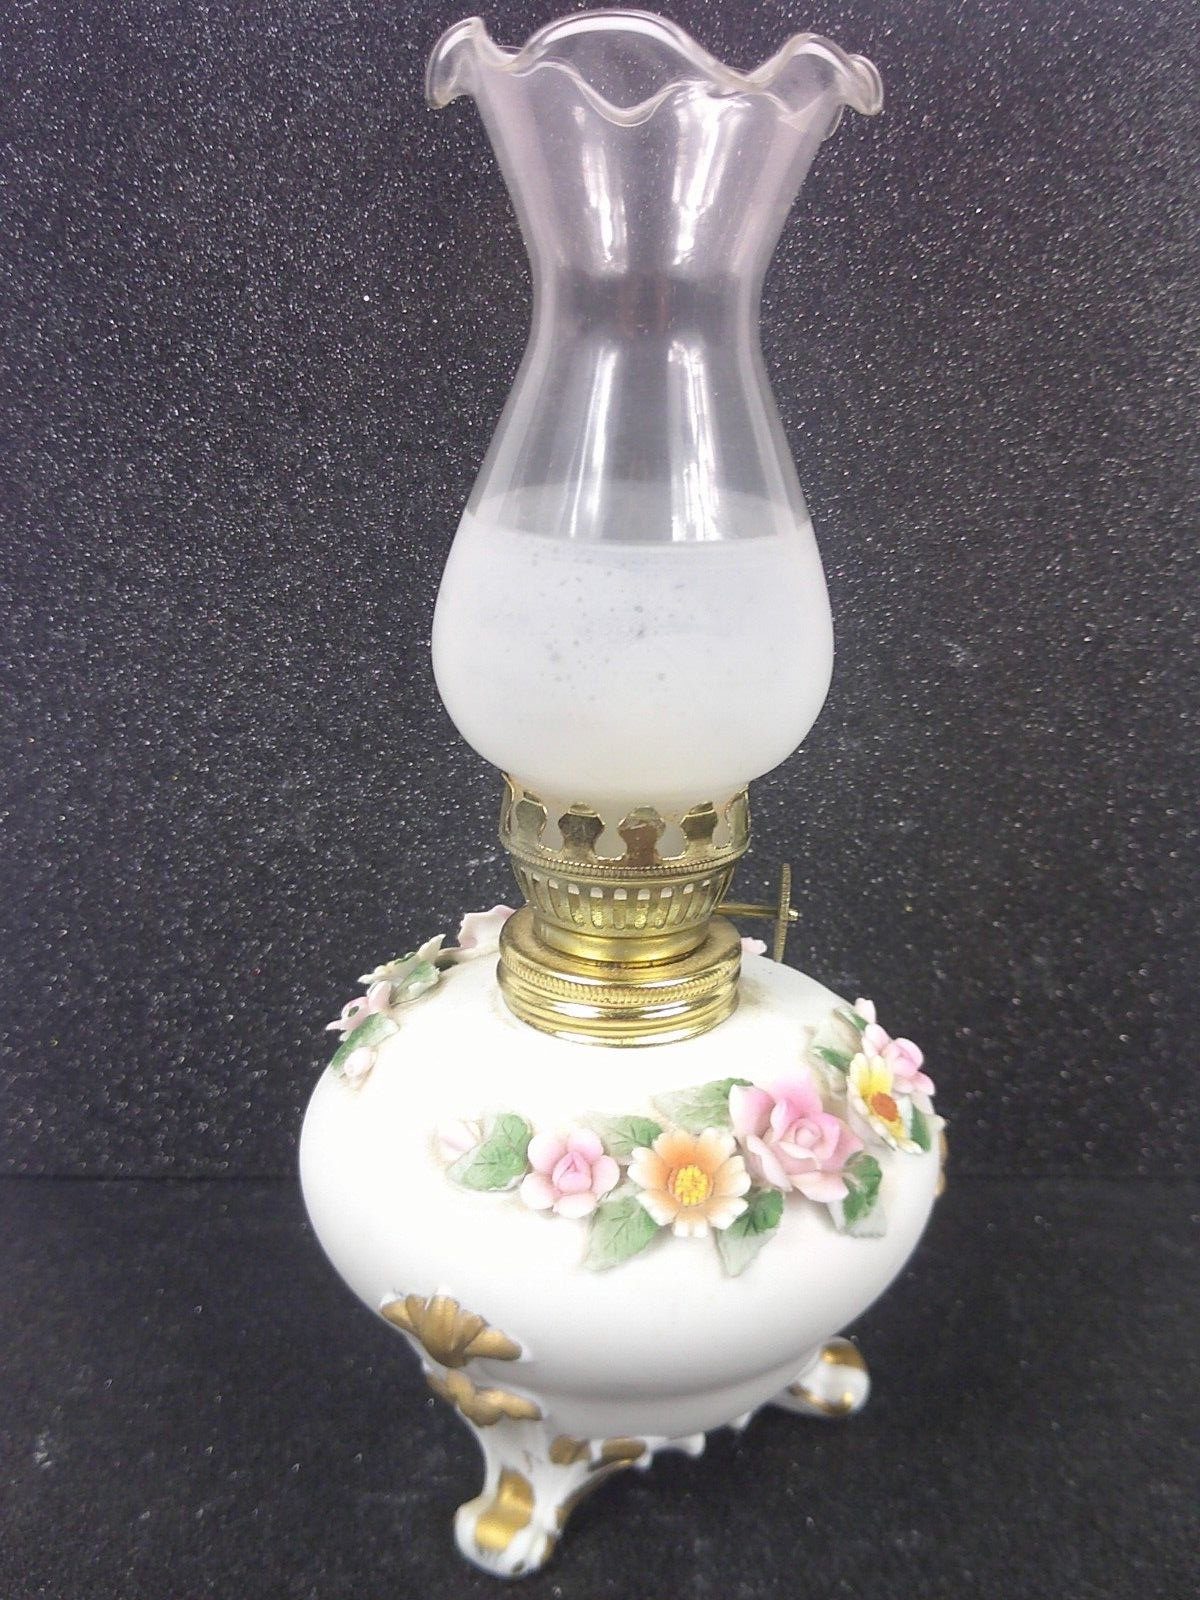 Vintage Lefton China Hand Painted Small Oil Lamp with Flowers KW4208 Japan